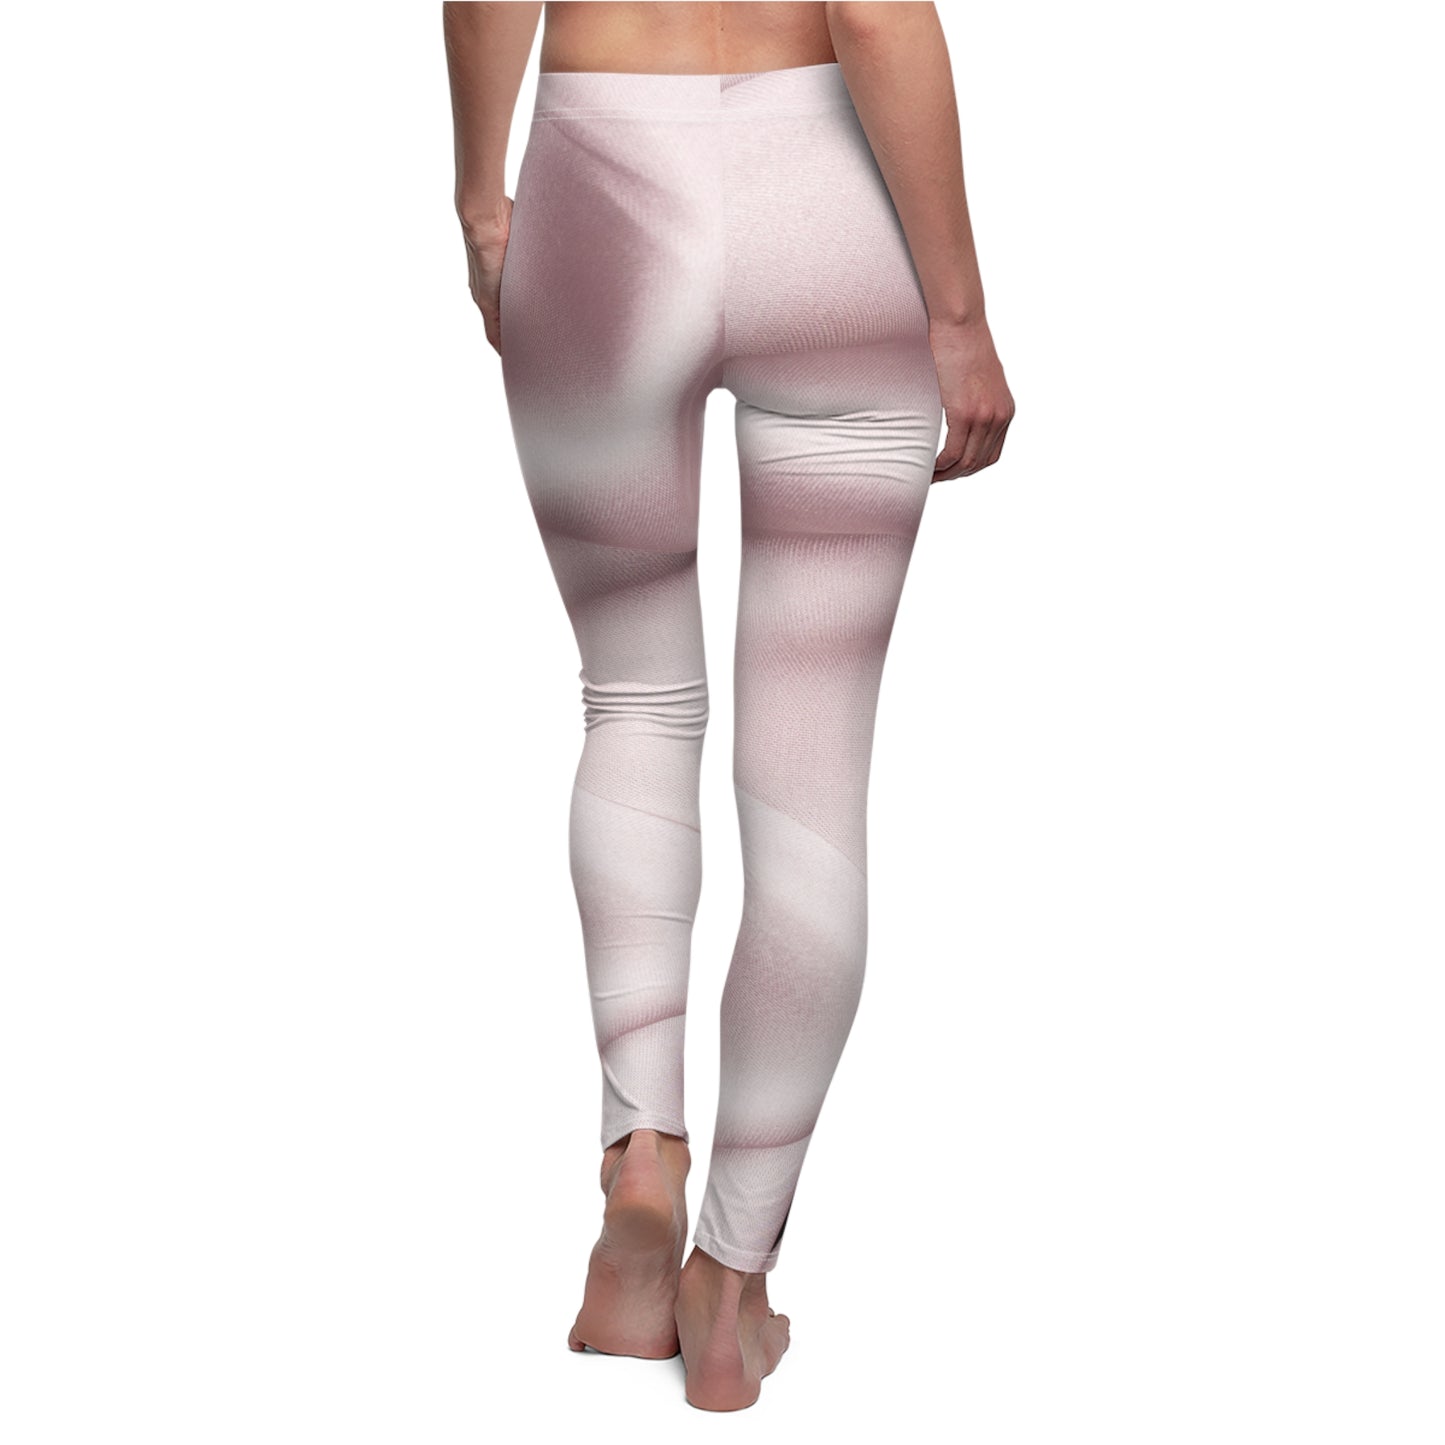 Pale Pink Abstract Leggings